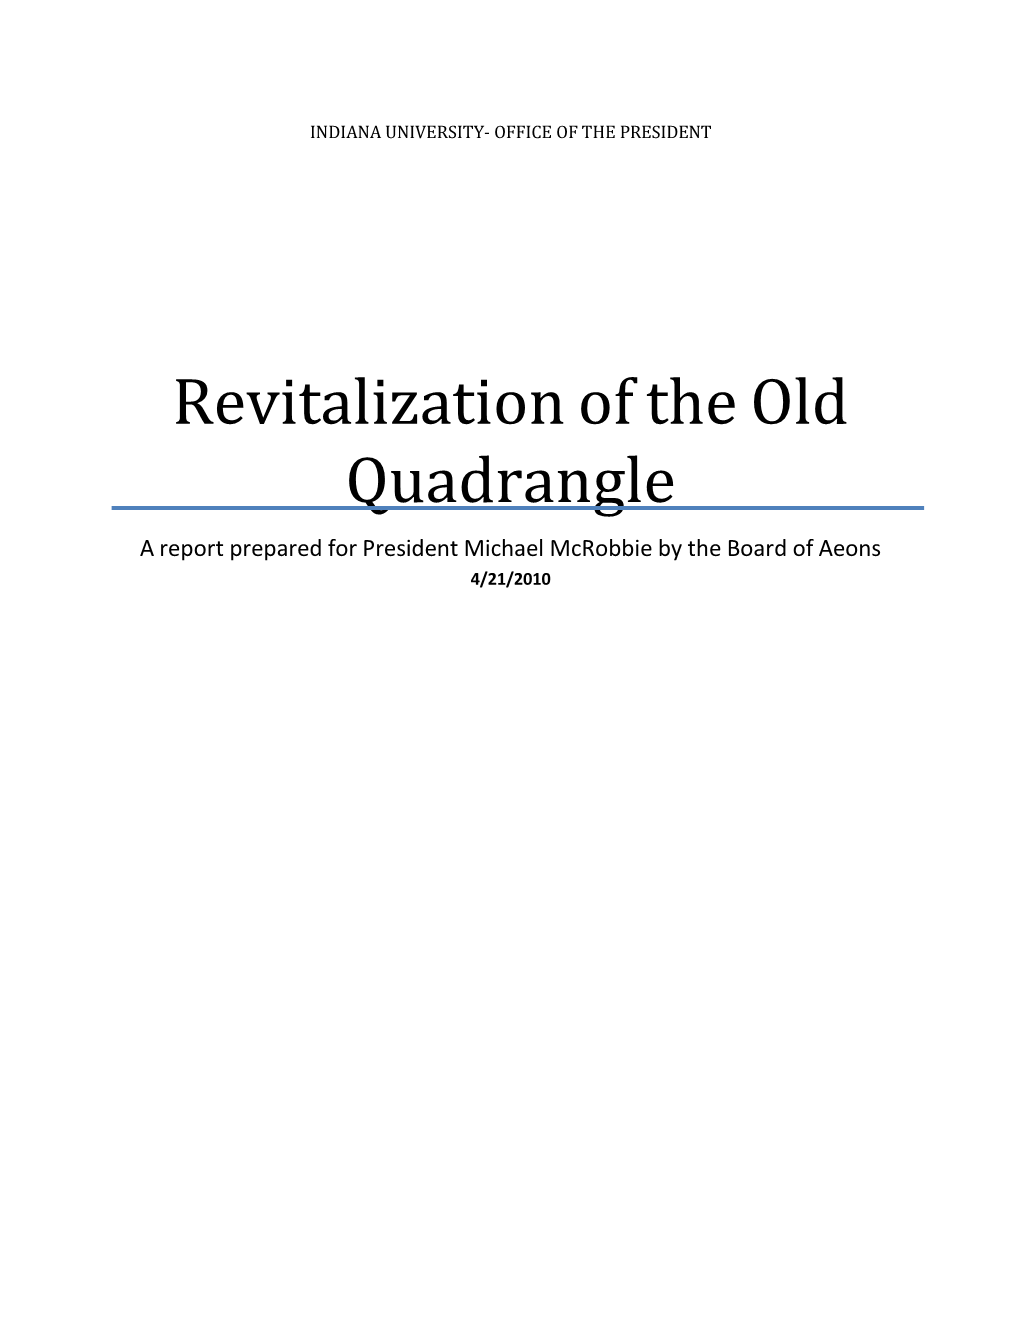 Revitalization of the Old Quadrangle a Report Prepared for President Michael Mcrobbie by the Board of Aeons 4/21/2010 Table of Contents